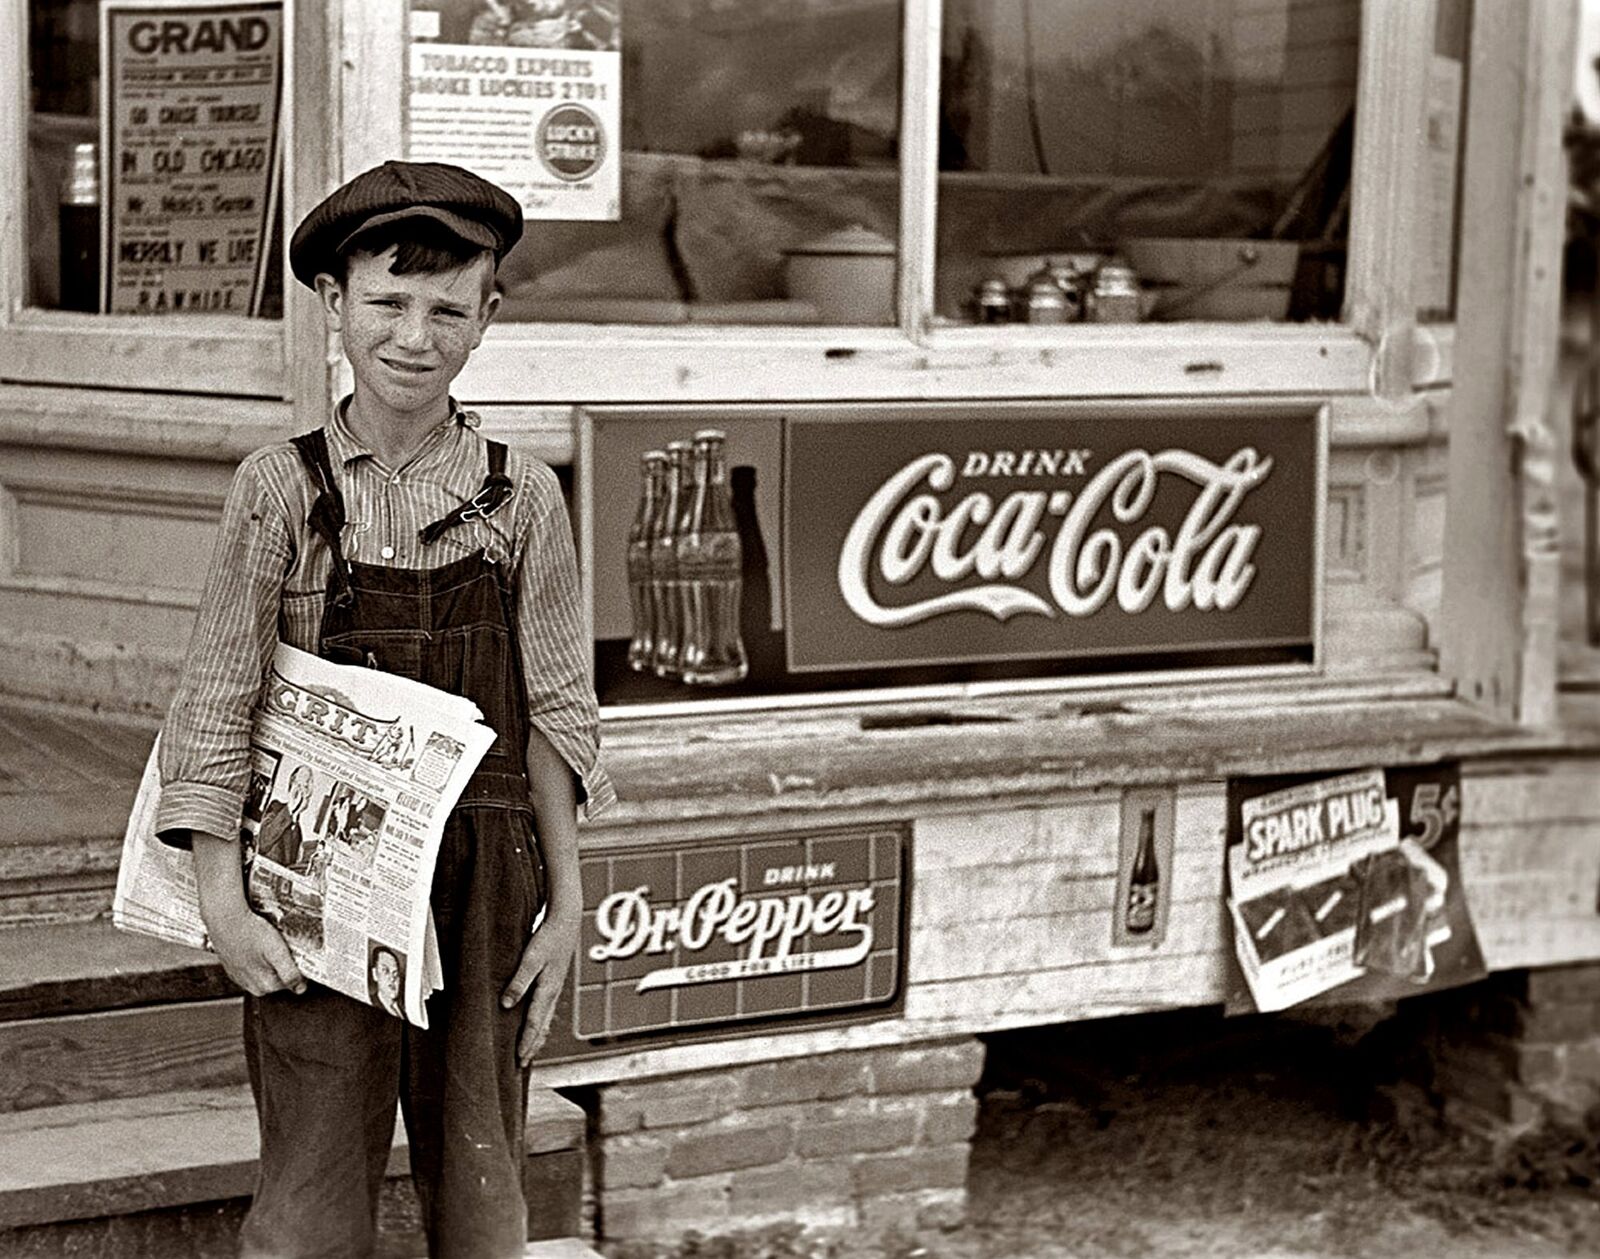 1938 GROCERY STORE & PAPER BOY Coca Cola Sign PHOTO  (199-J)